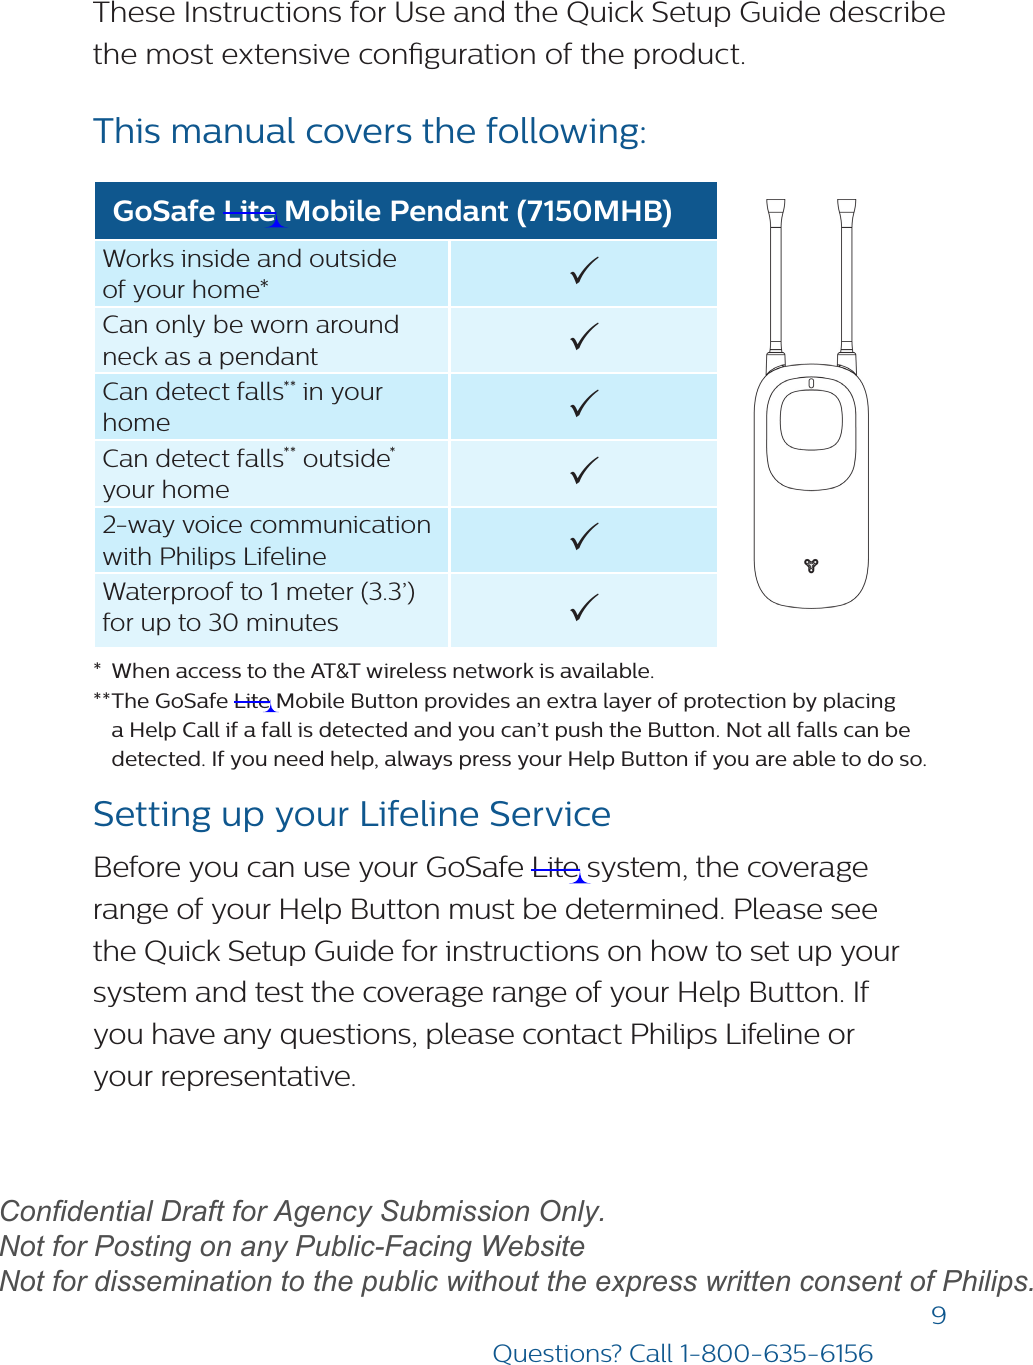 9Questions? Call 1-800-635-6156These Instructions for Use and the Quick Setup Guide describe the most extensive conguration of the product. This manual covers the following: GoSafe Lite Mobile Pendant (7150MHB)Works inside and outside of your home* Can only be worn around neck as a pendant Can detect falls** in your home Can detect falls** outside* your home 2-way voice communication with Philips Lifeline Waterproof to 1 meter (3.3’) for up to 30 minutes *  When access to the AT&amp;T wireless network is available.** The GoSafe Lite Mobile Button provides an extra layer of protection by placinga Help Call if a fall is detected and you can’t push the Button. Not all falls can be detected. If you need help, always press your Help Button if you are able to do so.Setting up your Lifeline ServiceBefore you can use your GoSafe Lite system, the coverage range of your Help Button must be determined. Please see the Quick Setup Guide for instructions on how to set up your system and test the coverage range of your Help Button. If  you have any questions, please contact Philips Lifeline or  your representative. draftConfidential Draft for Agency Submission Only.   Not for Posting on any Public-Facing Website Not for dissemination to the public without the express written consent of Philips.